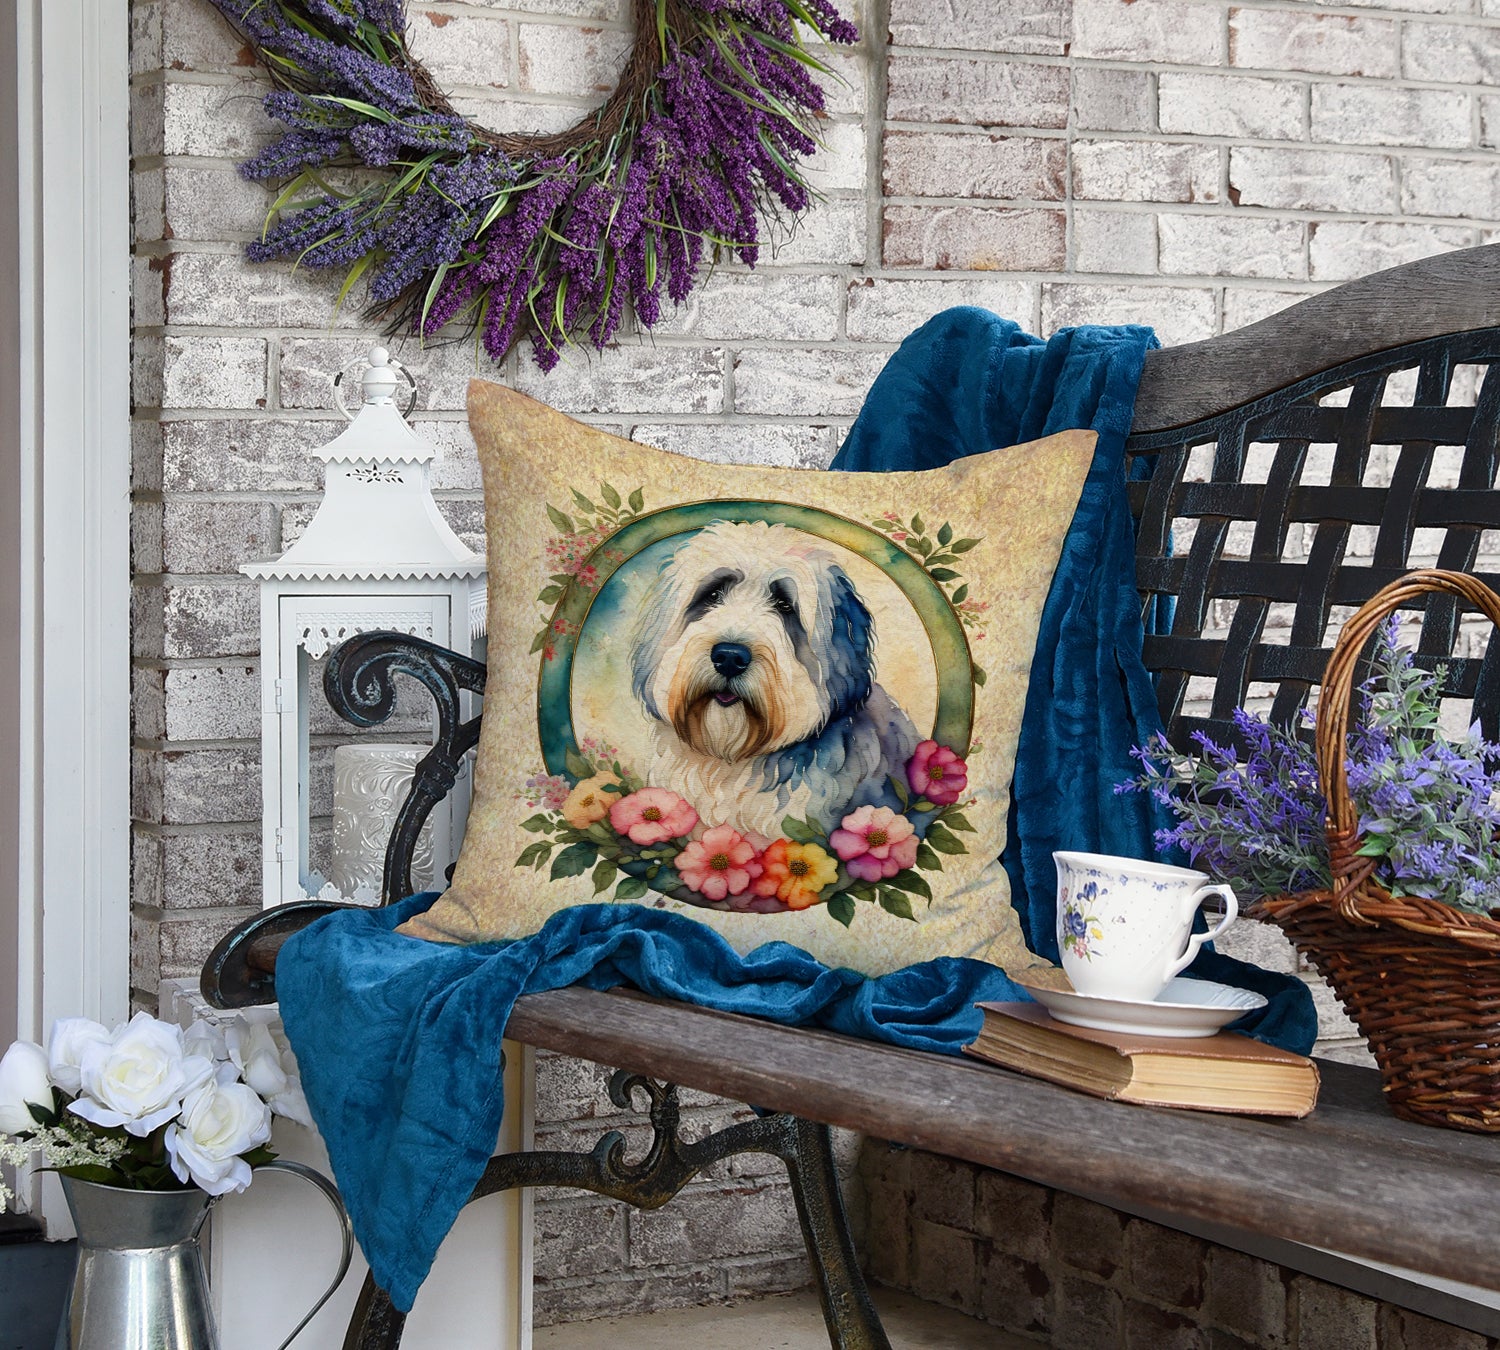 Old English Sheepdog and Flowers Fabric Decorative Pillow